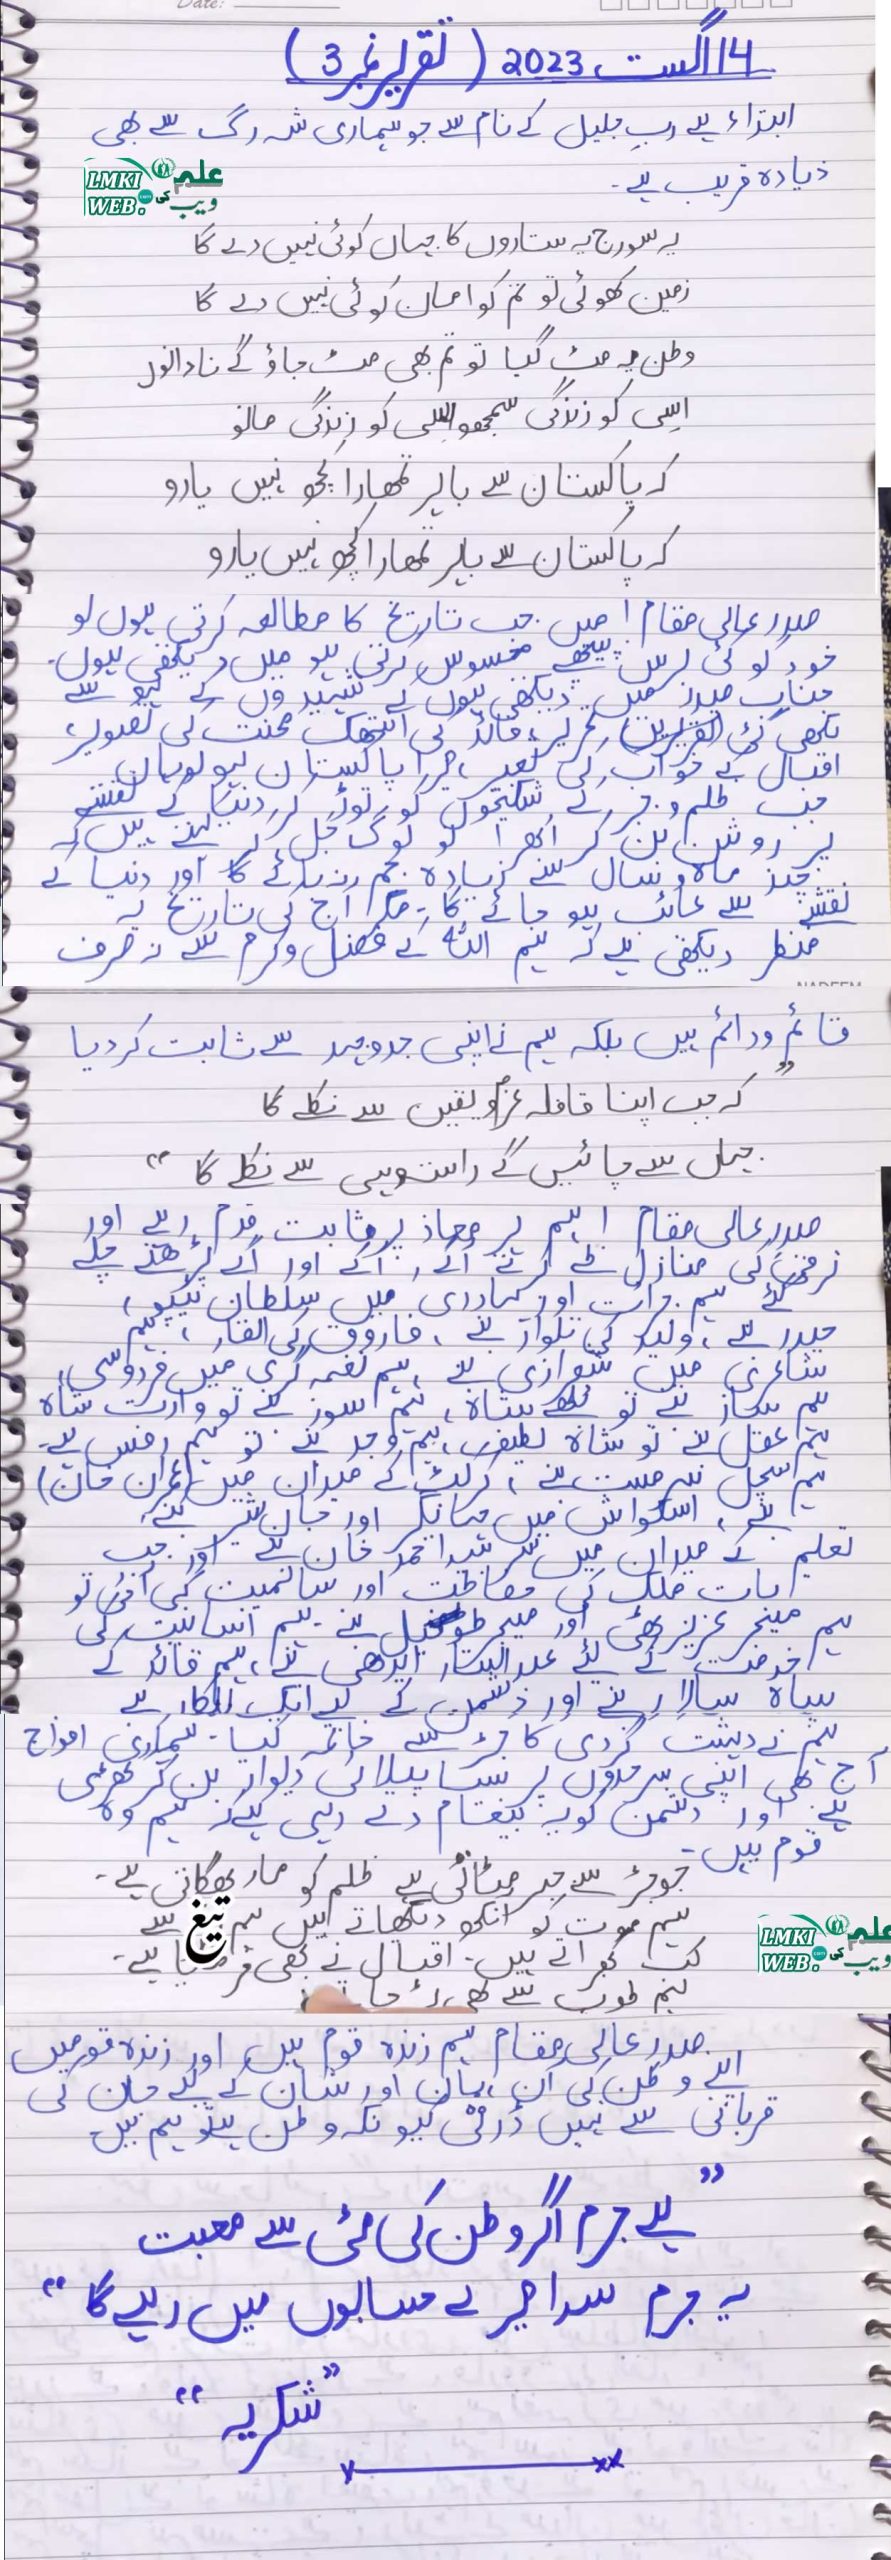 speech on independence day in urdu for class 5